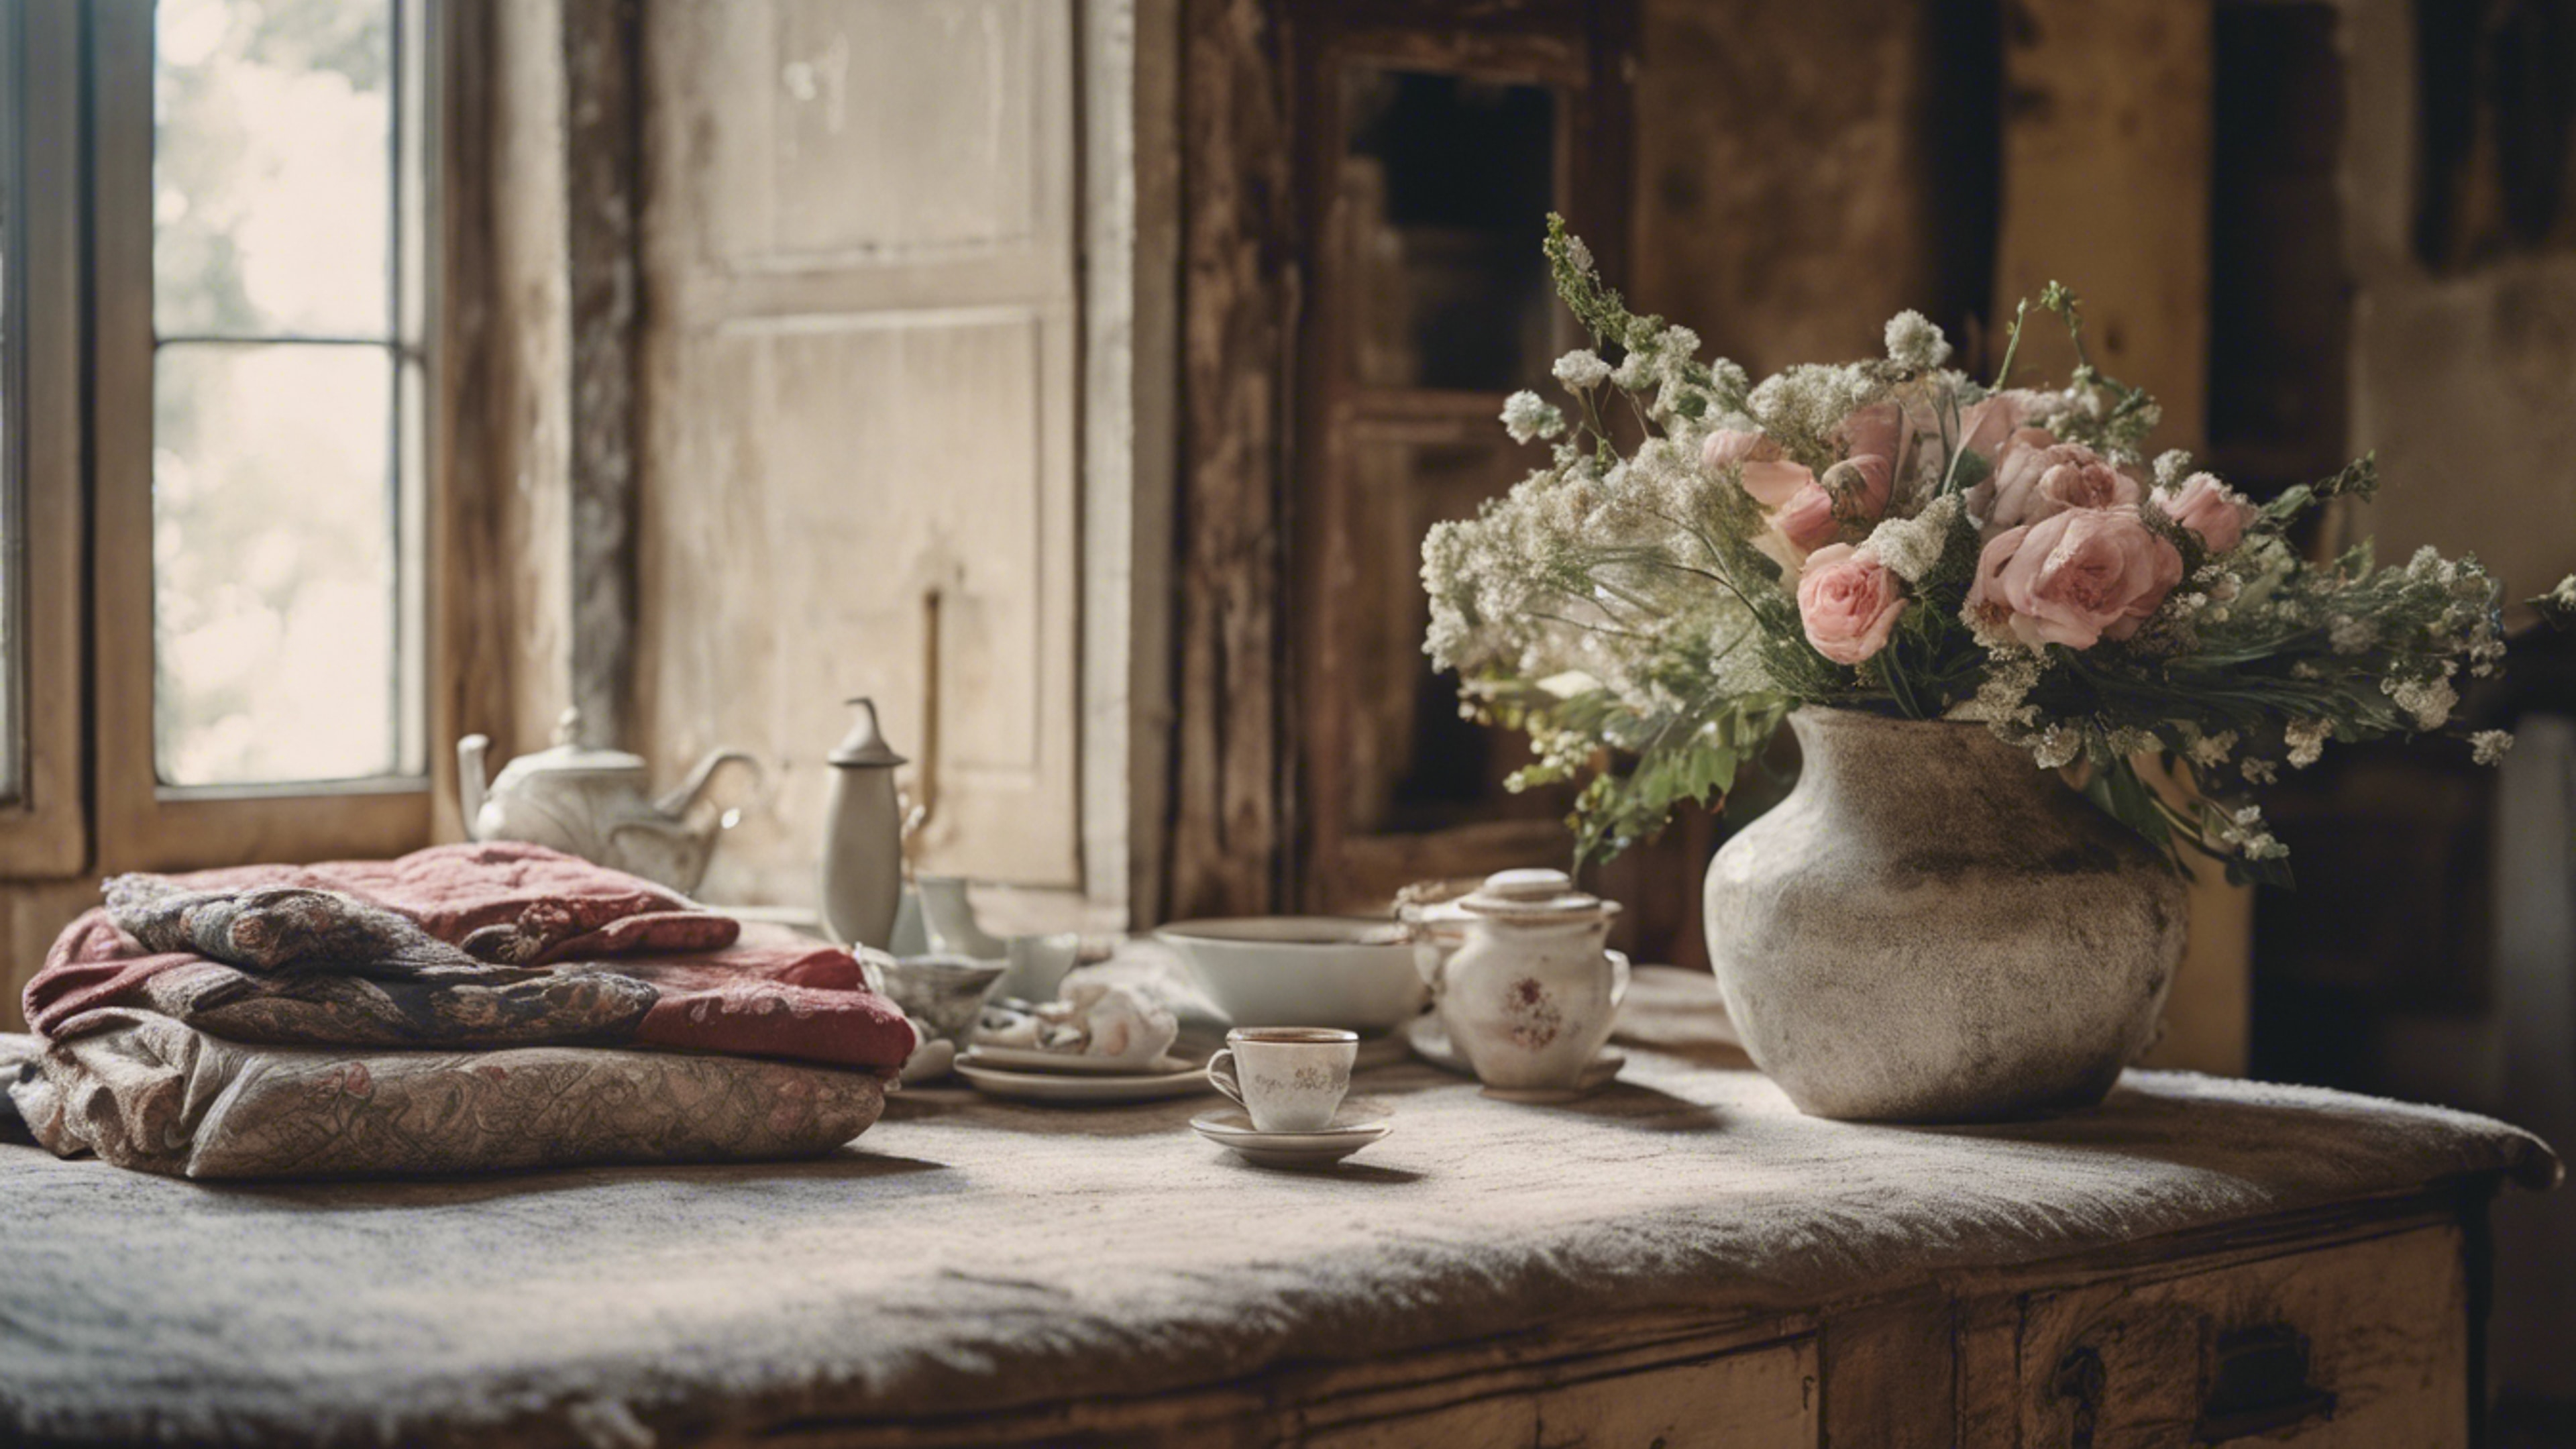 Vintage French country home interiors, full of hand-stitched textiles, distressed furniture, and fresh flowers. Hintergrund[3ce768b1b5e34f149bef]